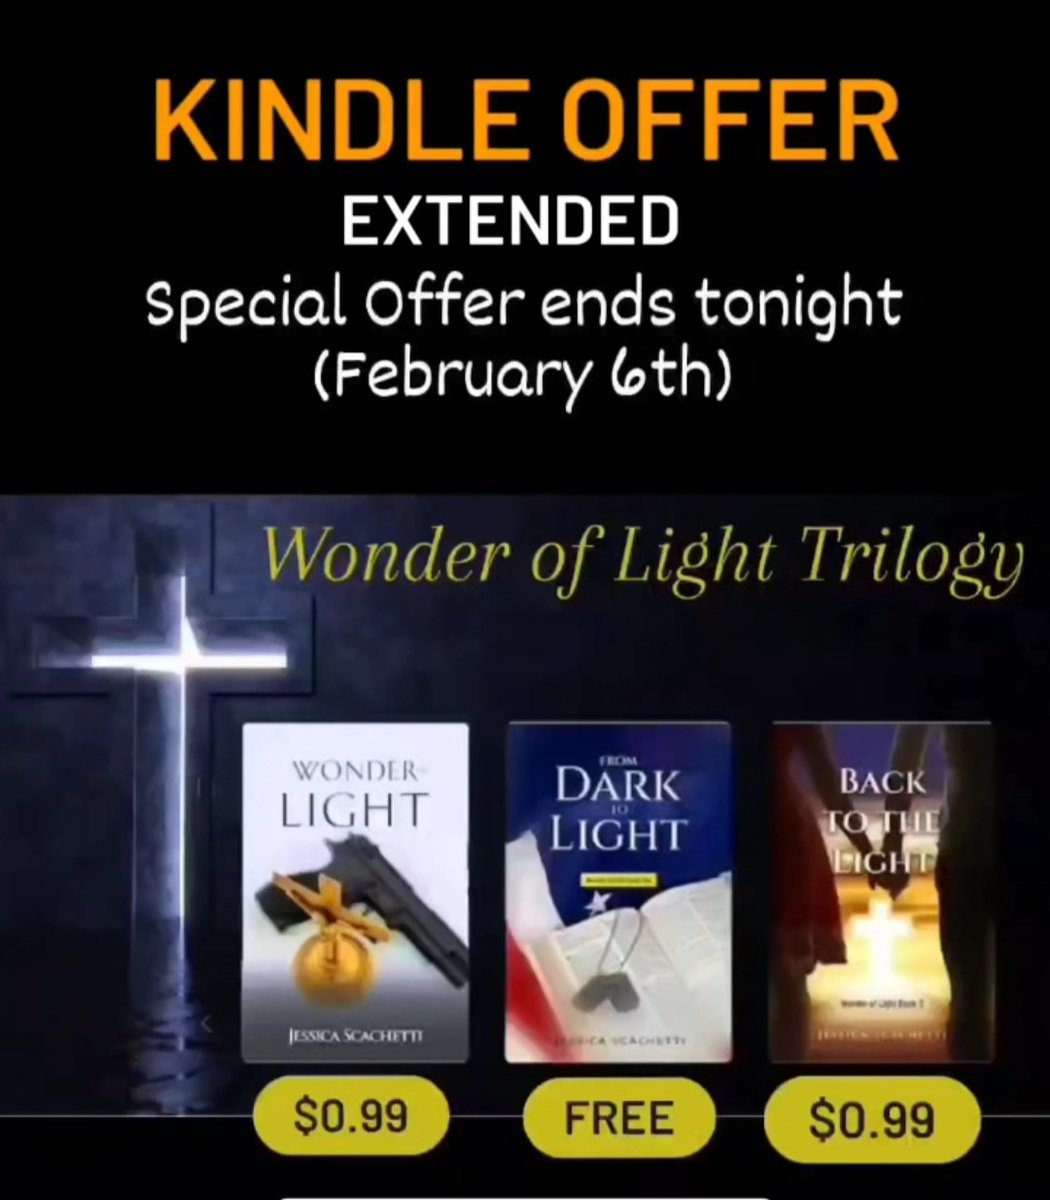 ⚠️Kindle Book Series Offer Extended⚠️
Wonder of Light Trilogy

Through 11:59 p.m. tonight, you can get book 1 instantly for just $0.99, book 2 instantly for #free and book 3 can be pre-ordered for $0.99, with delivery this Valentine's Day. 

Get it here: 
amazon.com/dp/B09VNFWRNN